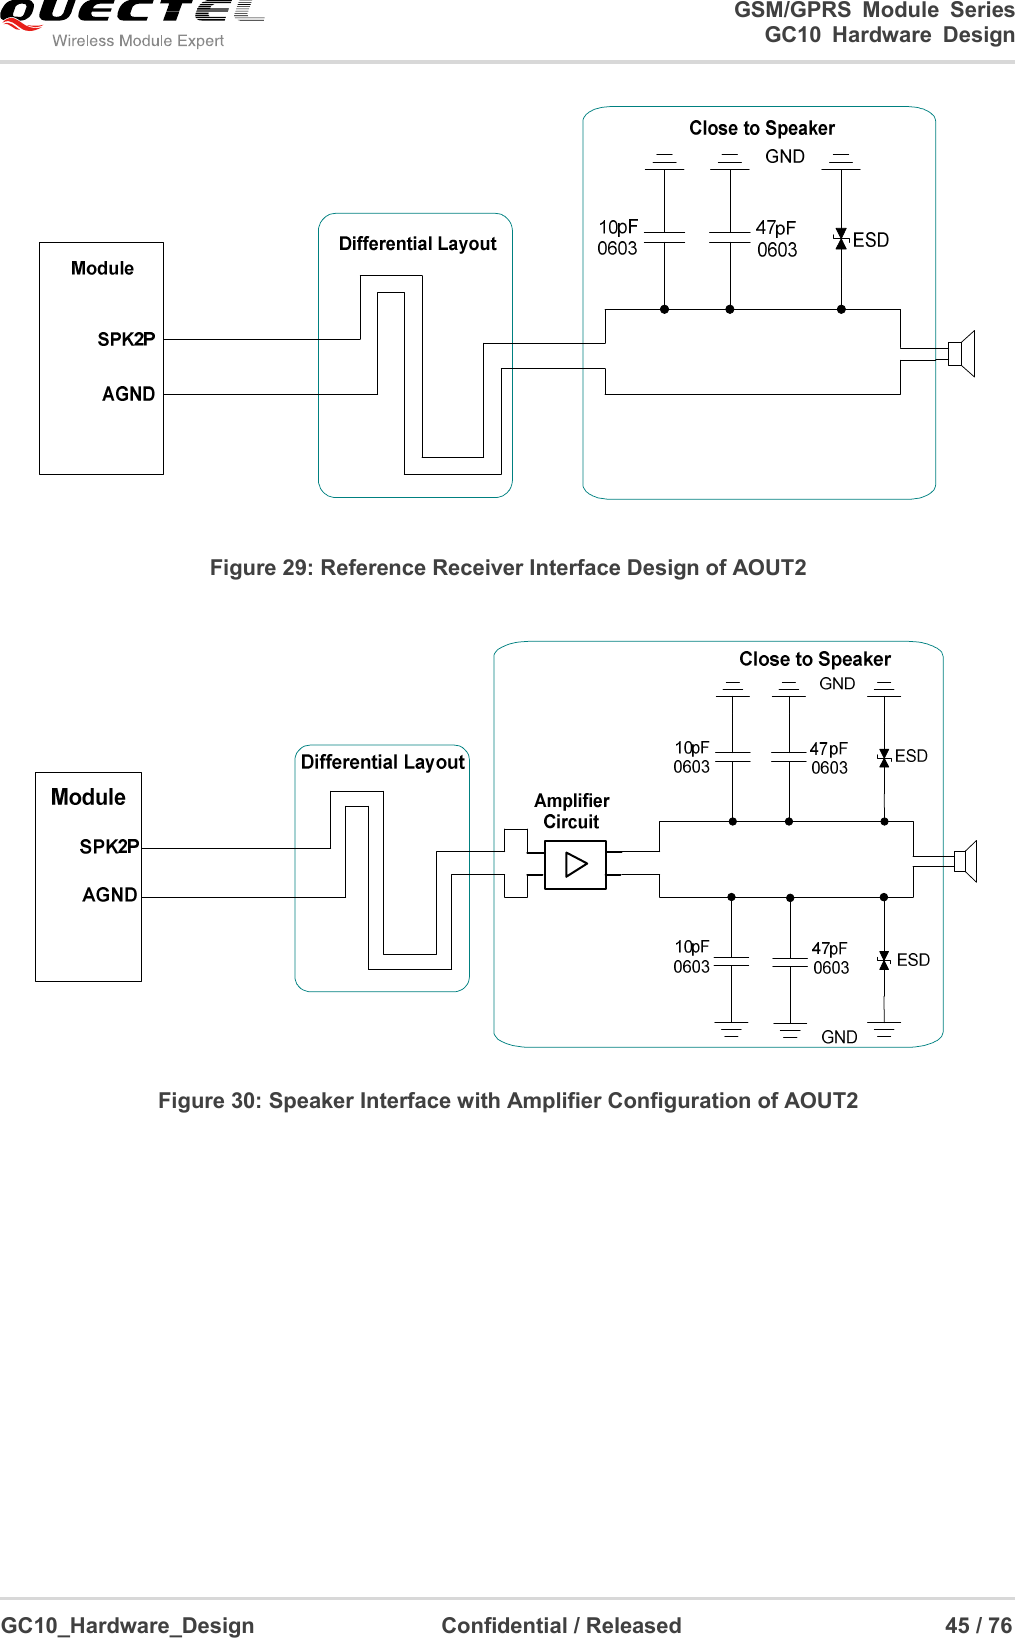                                                                          GSM/GPRS  Module  Series                                                                 GC10 Hardware Design  GC10_Hardware_Design                                  Confidential / Released                                                45 / 76       Figure 29: Reference Receiver Interface Design of AOUT2  Figure 30: Speaker Interface with Amplifier Configuration of AOUT2  